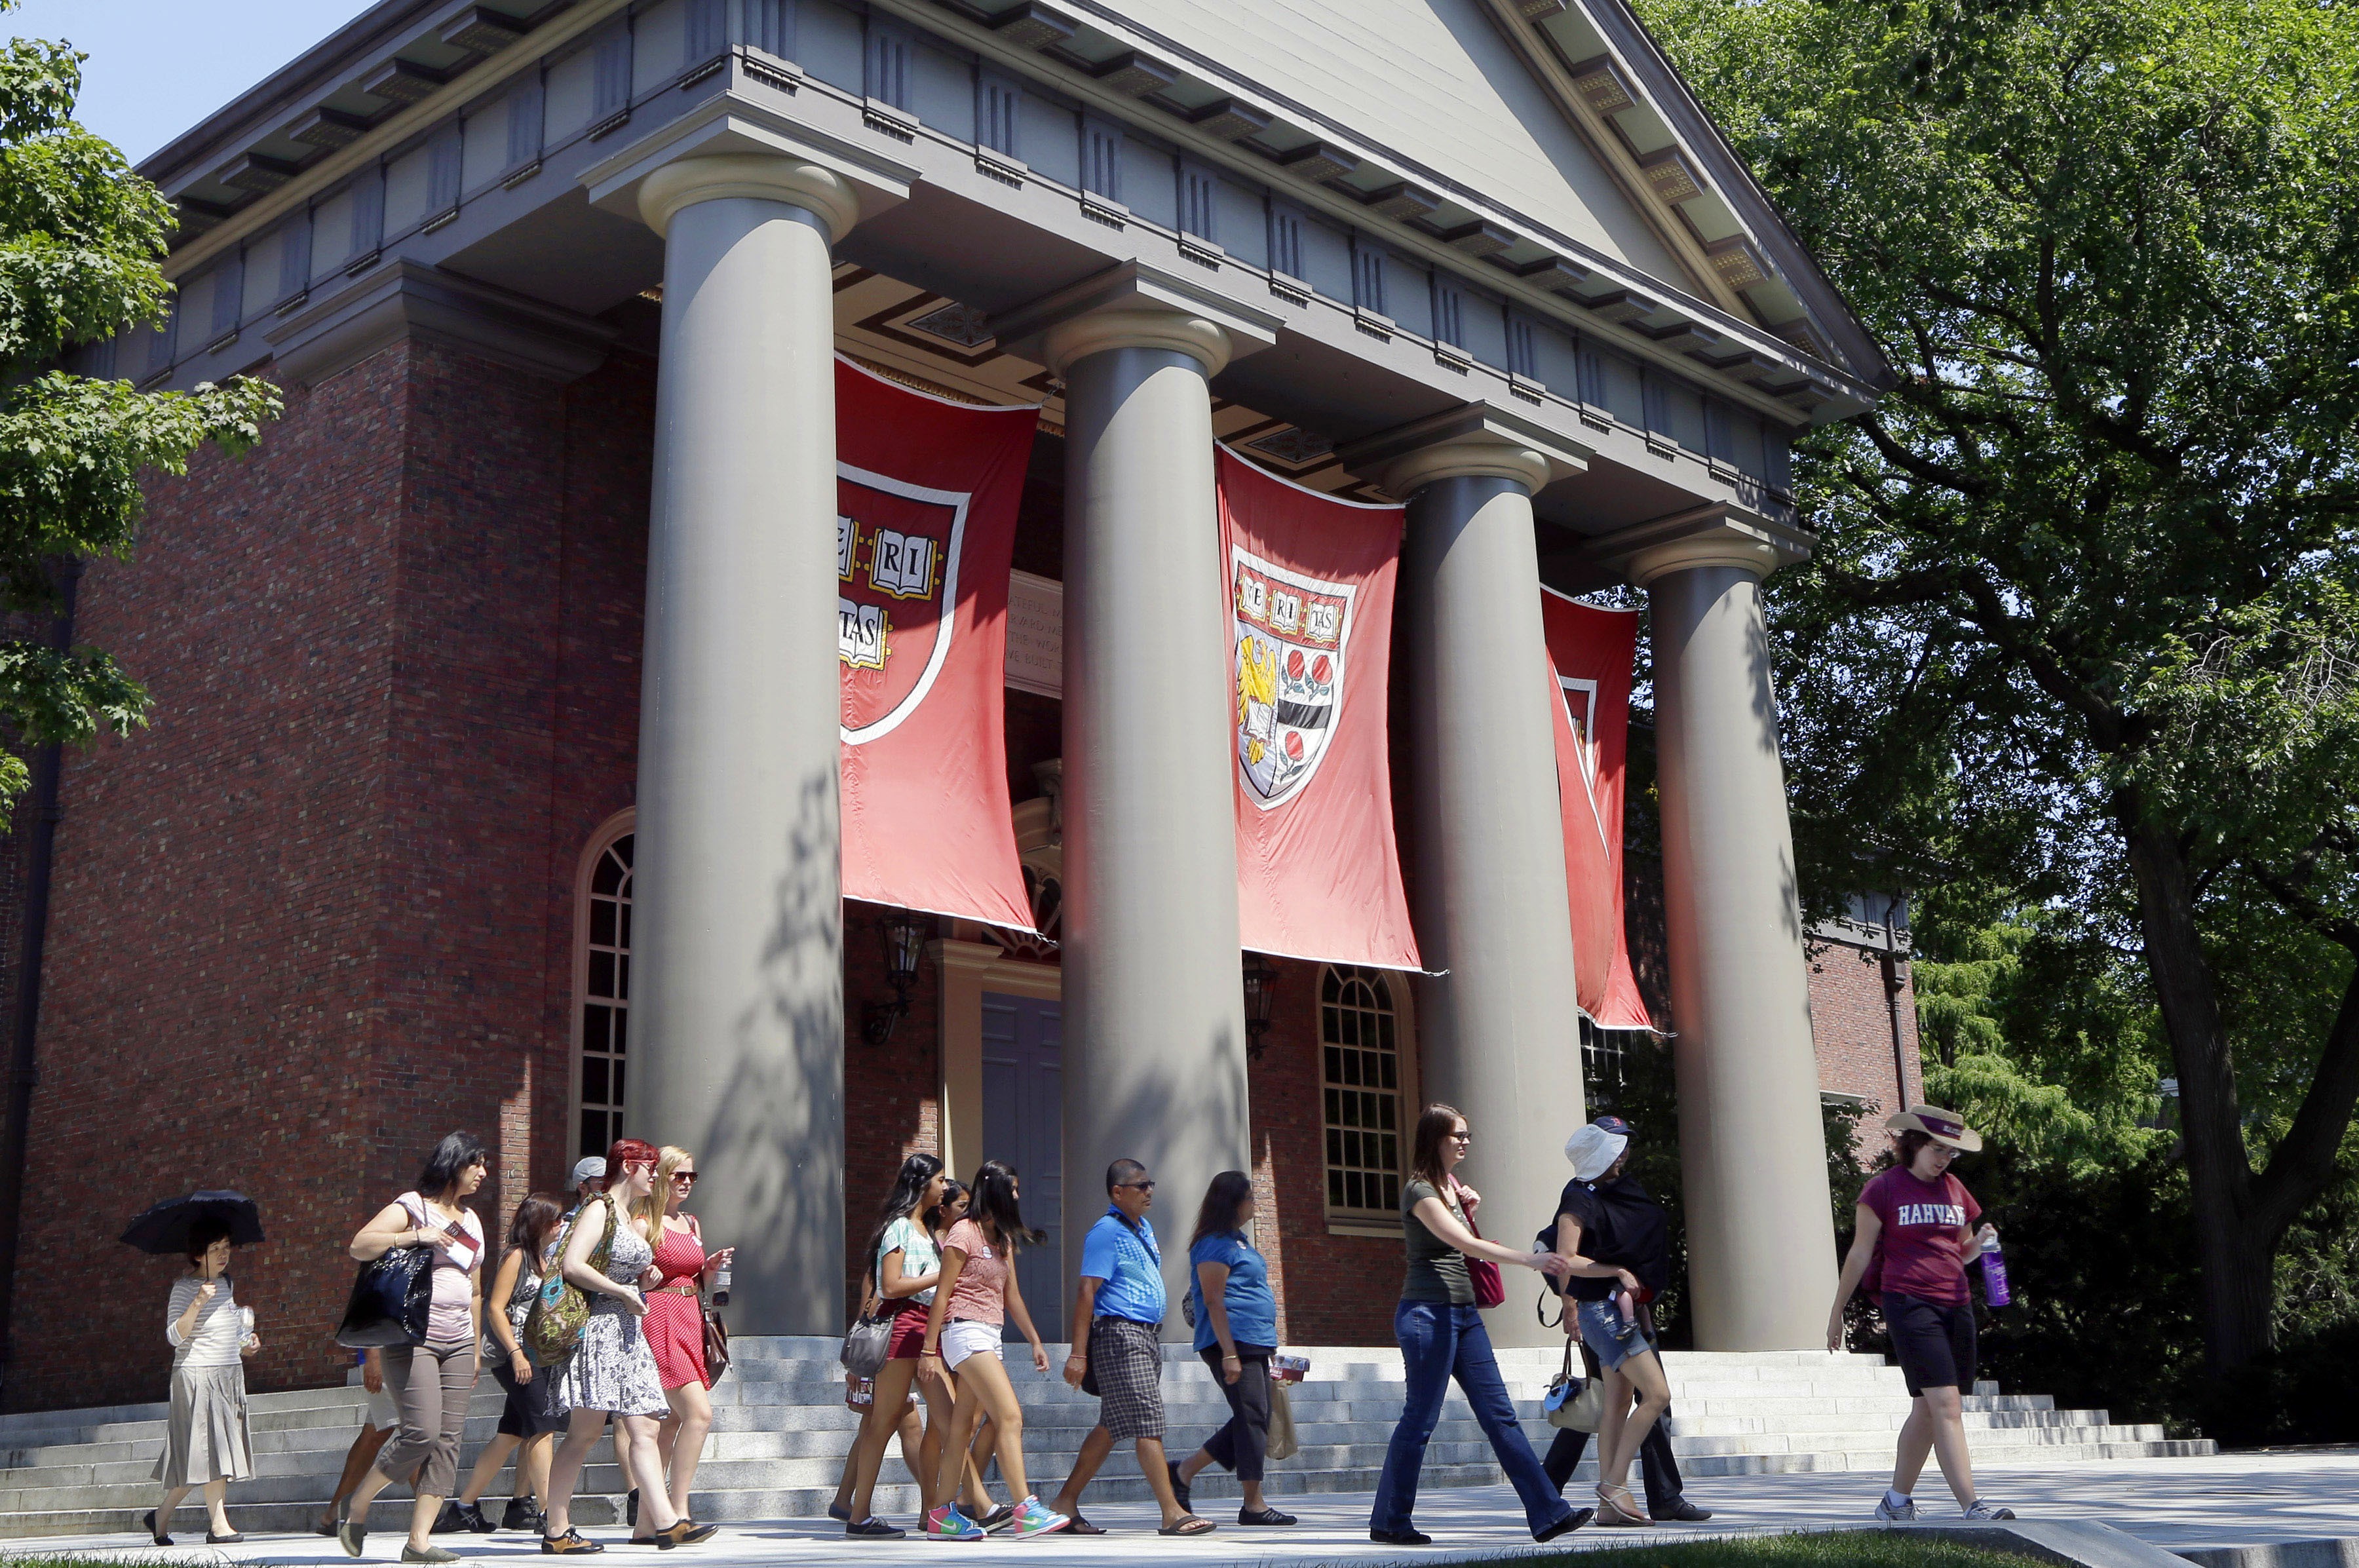 A tour group walks through the campus of Harvard University in Cambridge, Massachusetts, in 2012. Harvard has been named in a complaint by a group of several dozen Asian Americans claiming discrimination in the university admissions process. Photo: AP